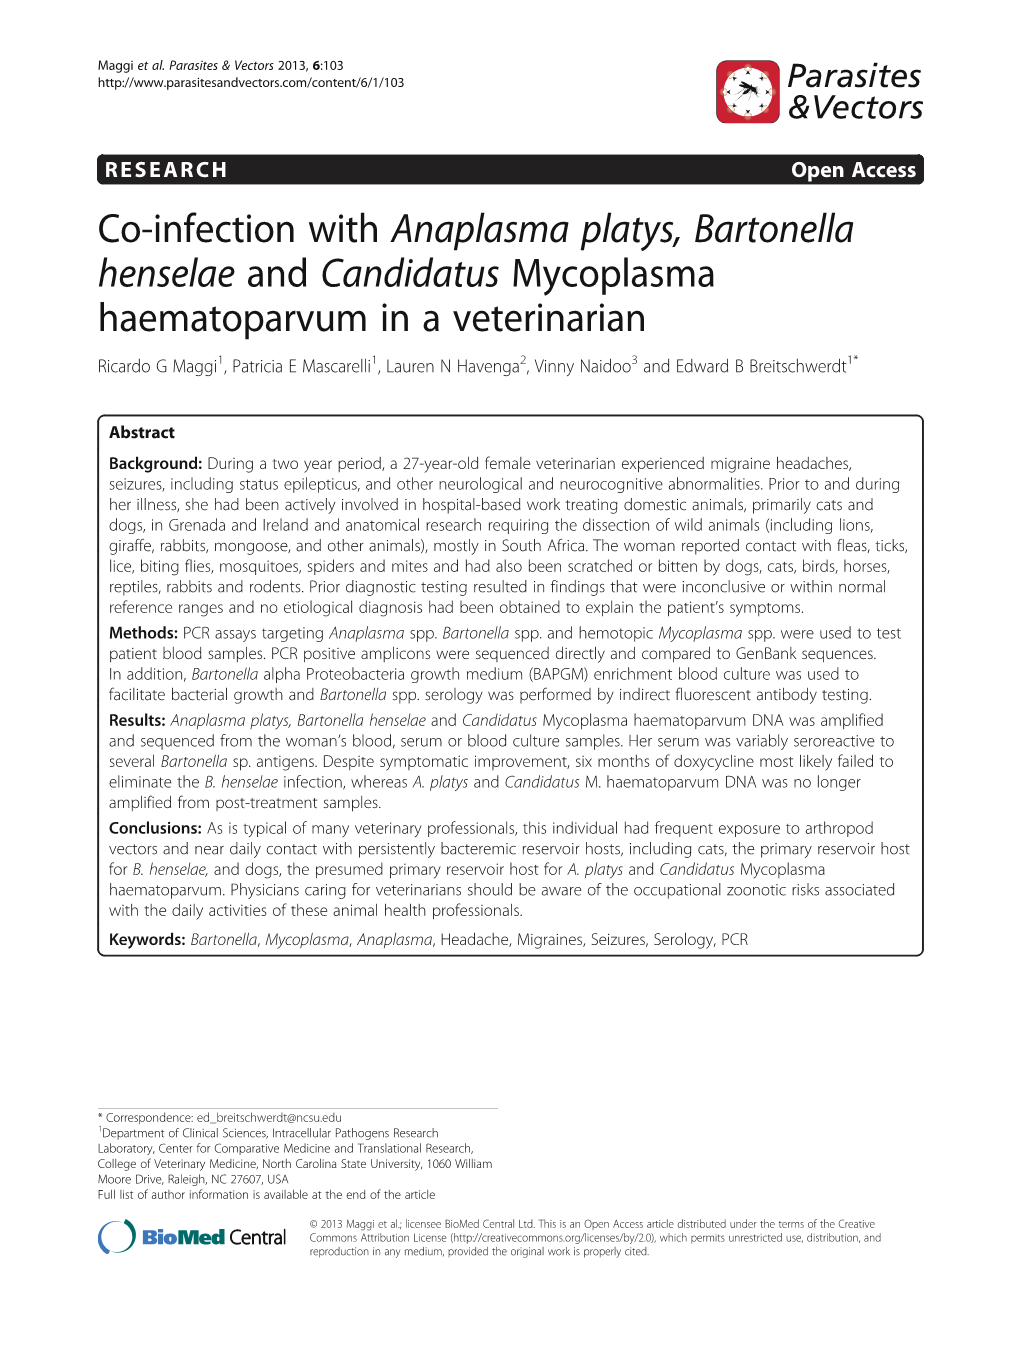 Co-Infection with Anaplasma Platys, Bartonella Henselae And